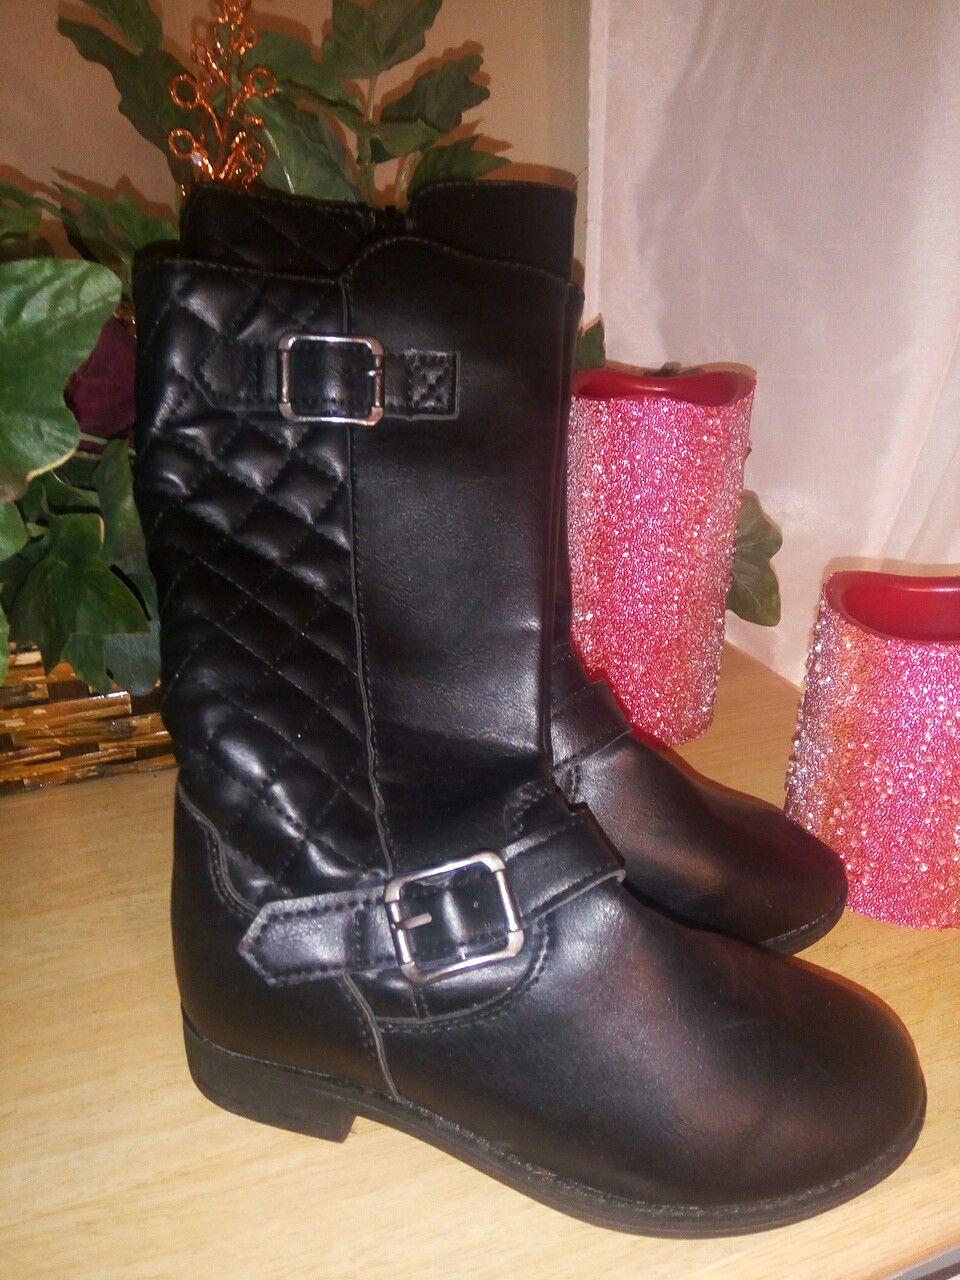 New girls boots size 11